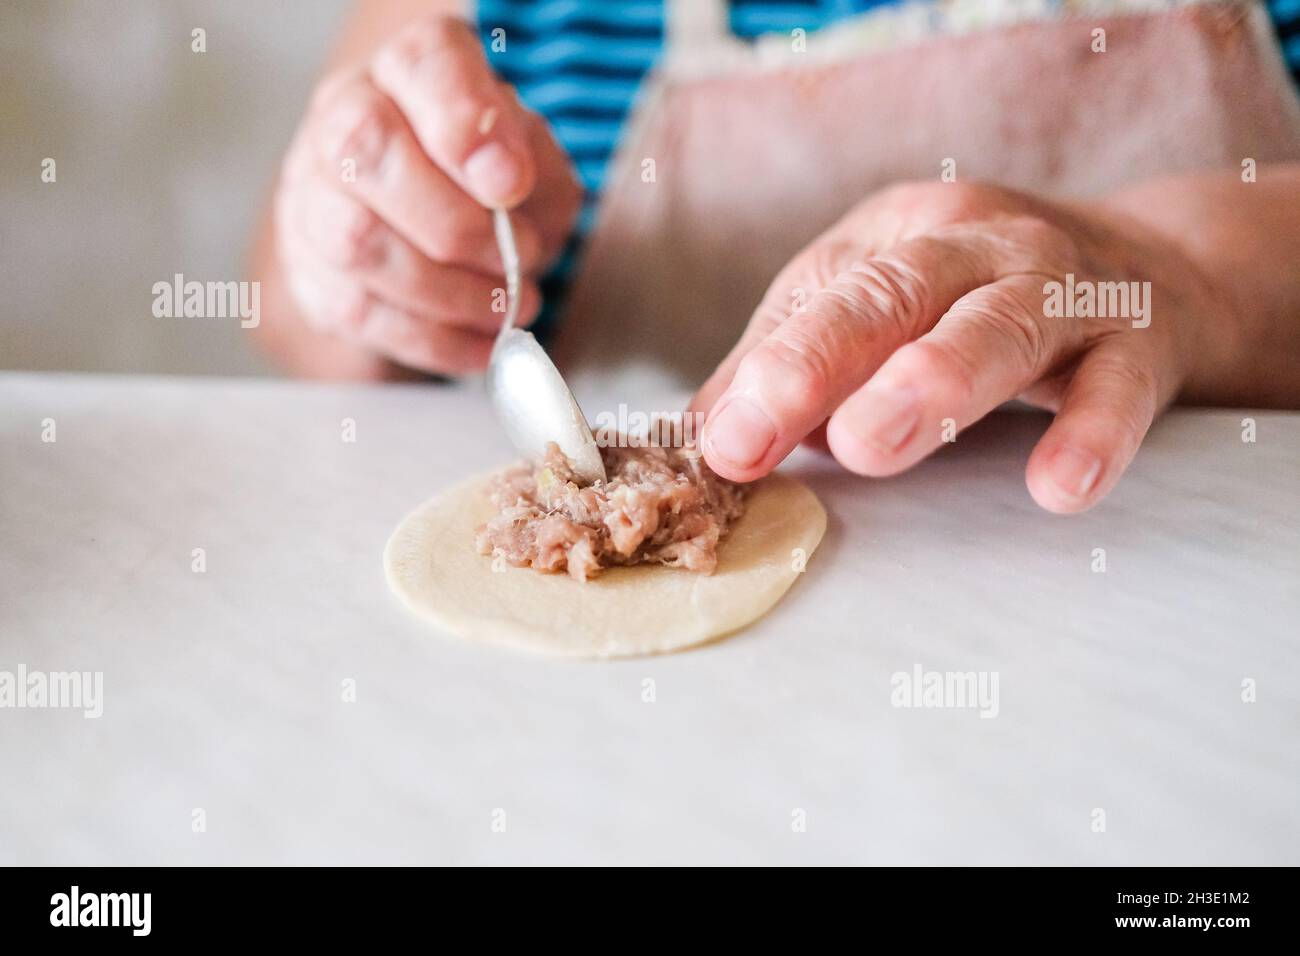 Grandmother spreads the meat on a thin piece of dough. Cooking manti or dumplings Stock Photo